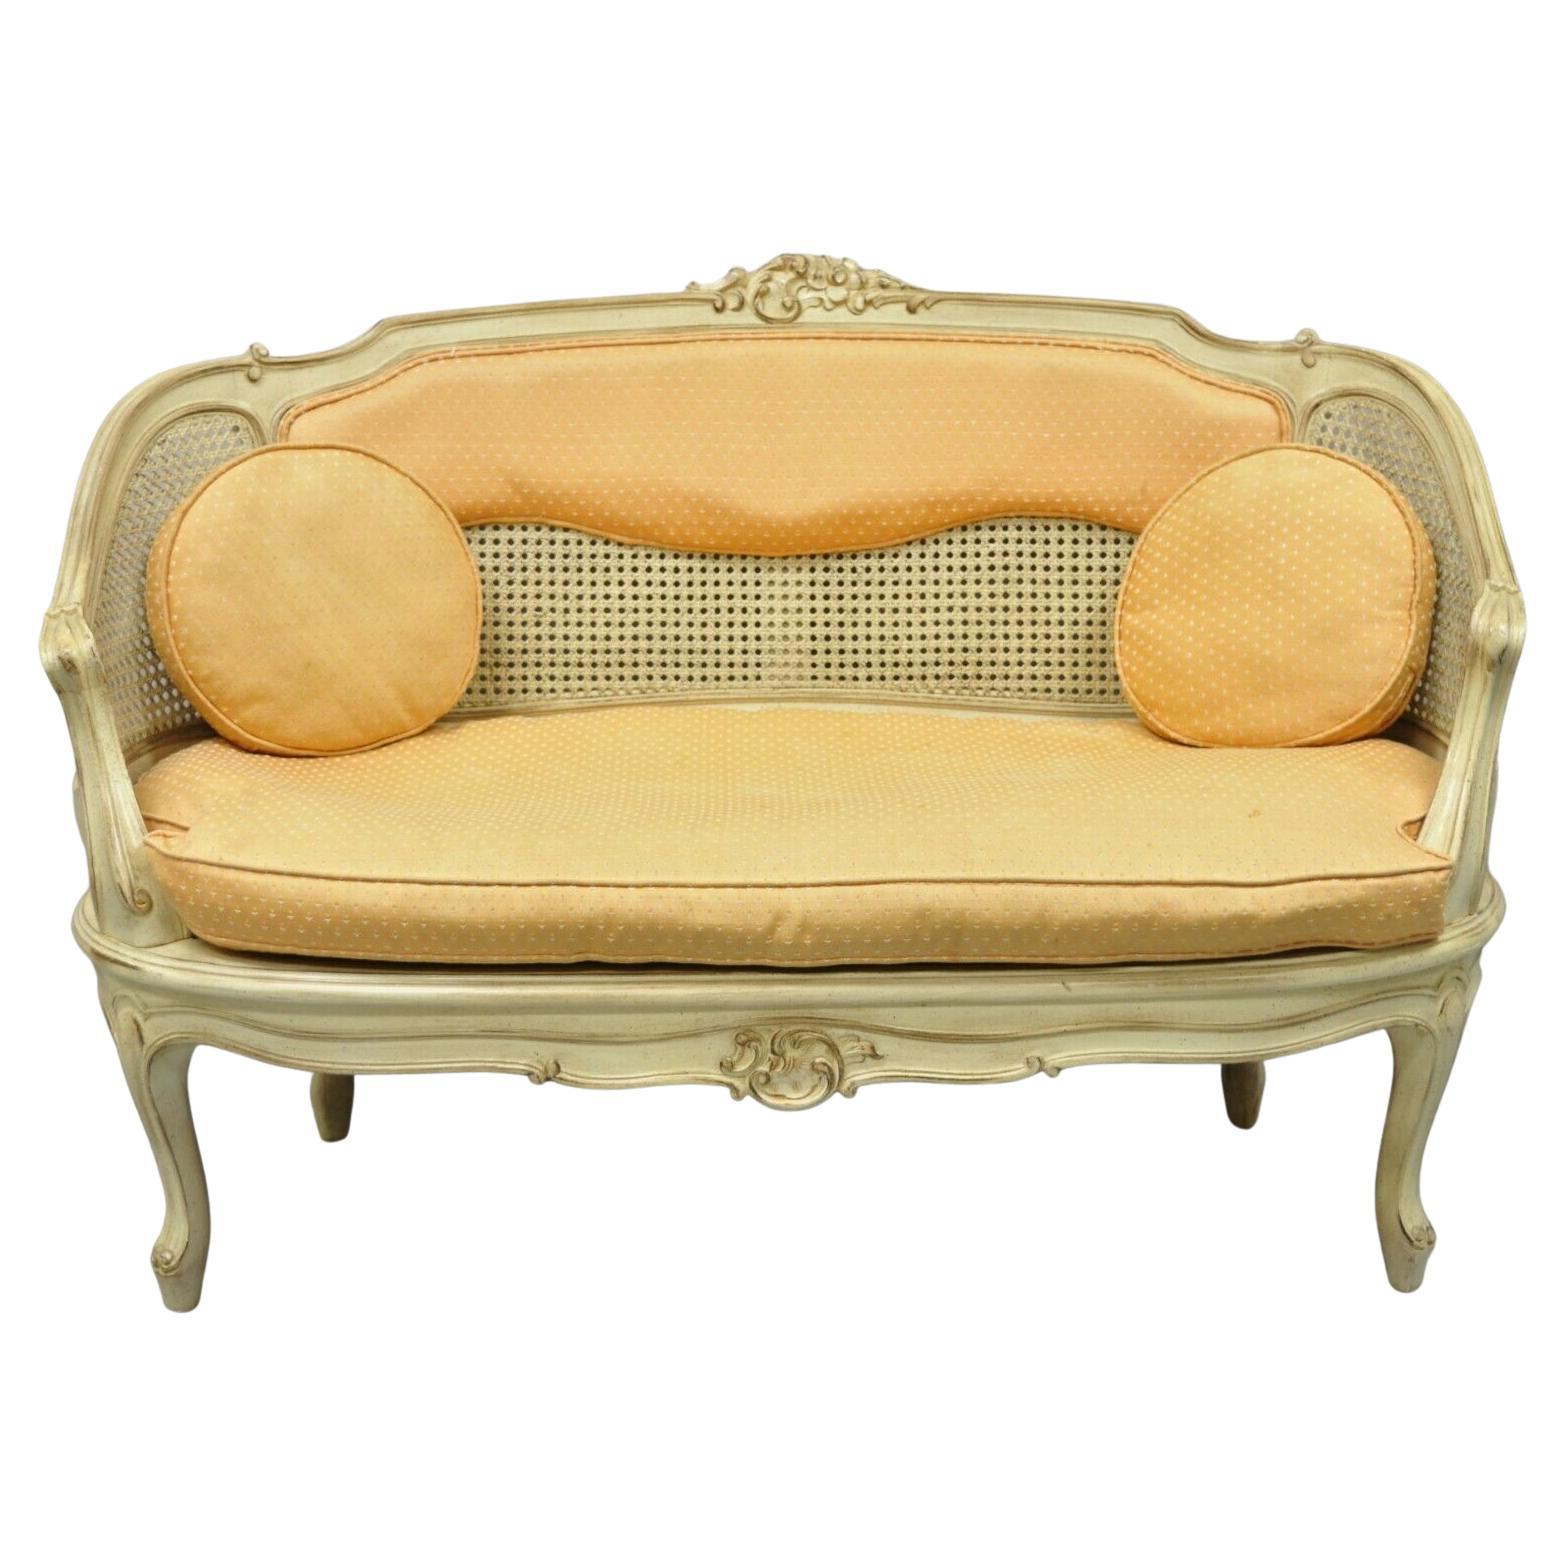 Vintage French Louis XV Victorian Style Small Cane Cream Settee Loveseat Sofa For Sale